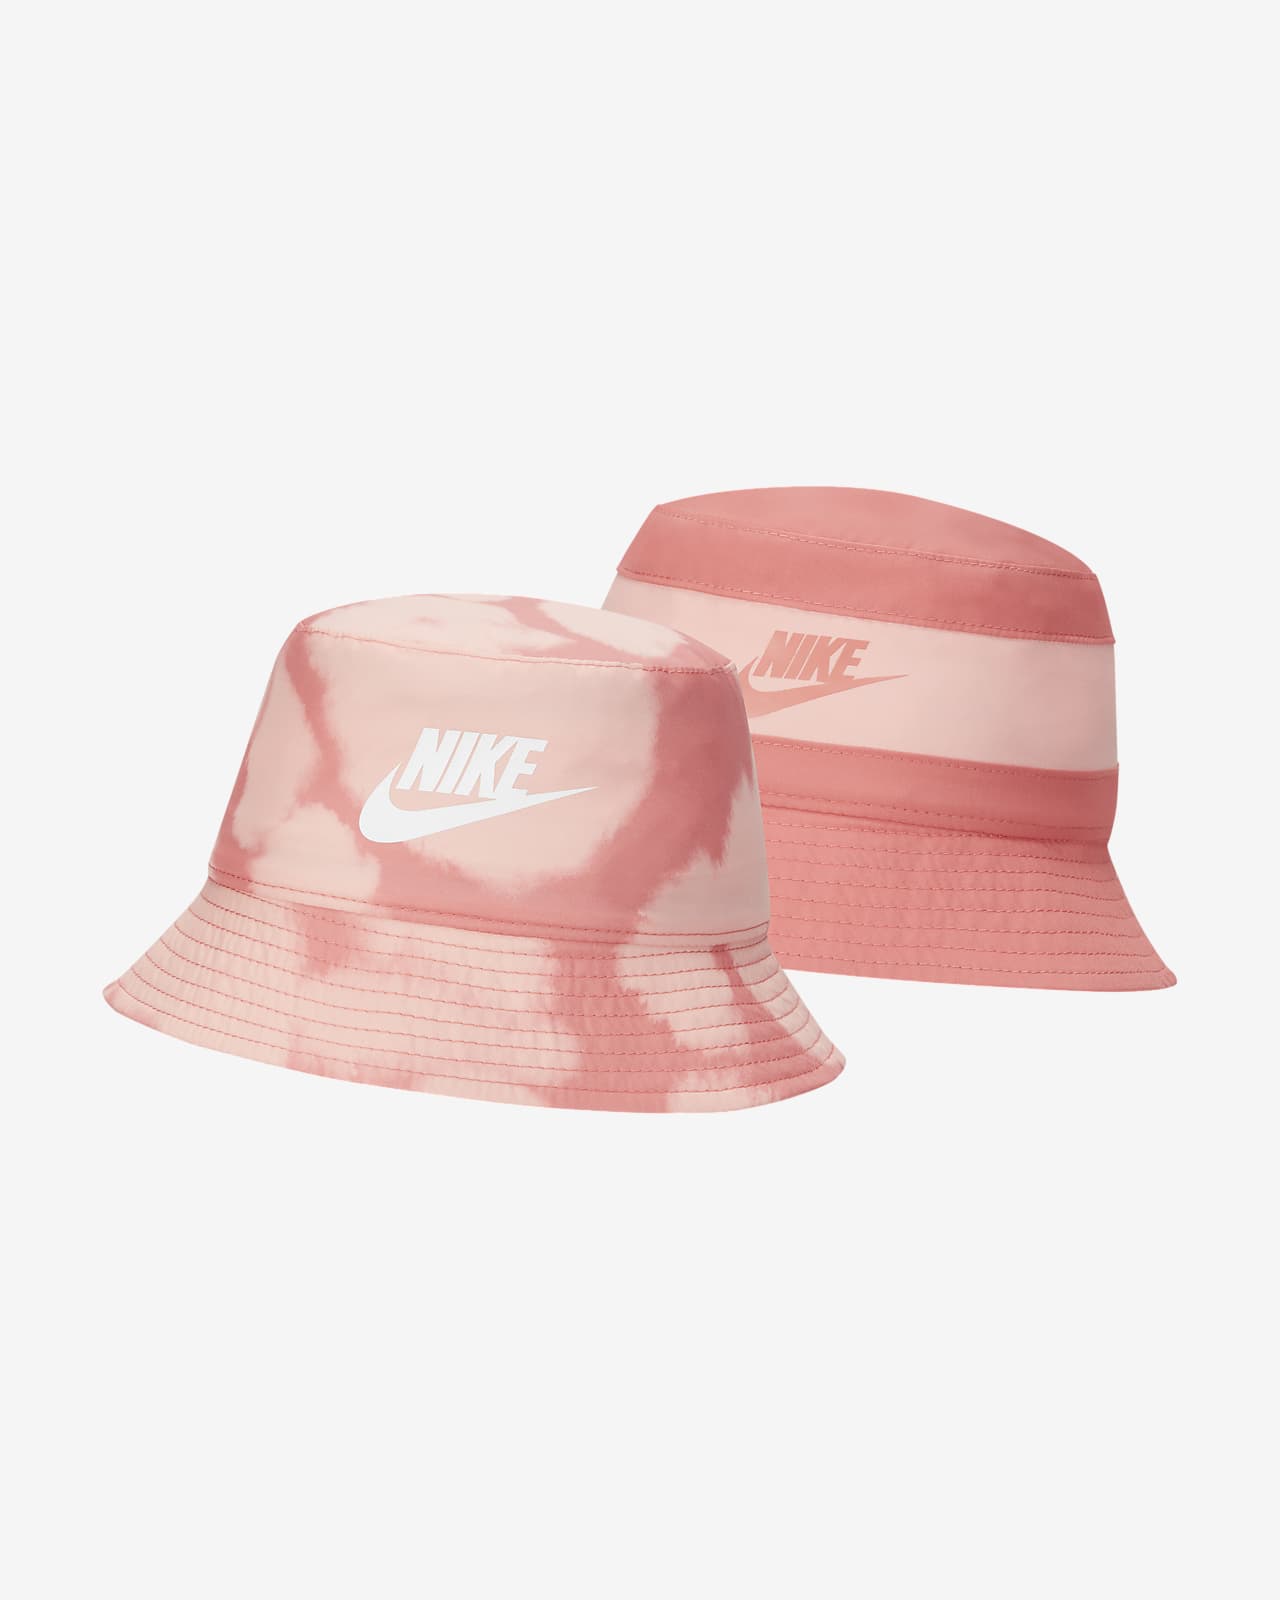 Pink Single WOMEN FASHION Accessories Hat and cap Pink NoName hat and cap discount 75% 